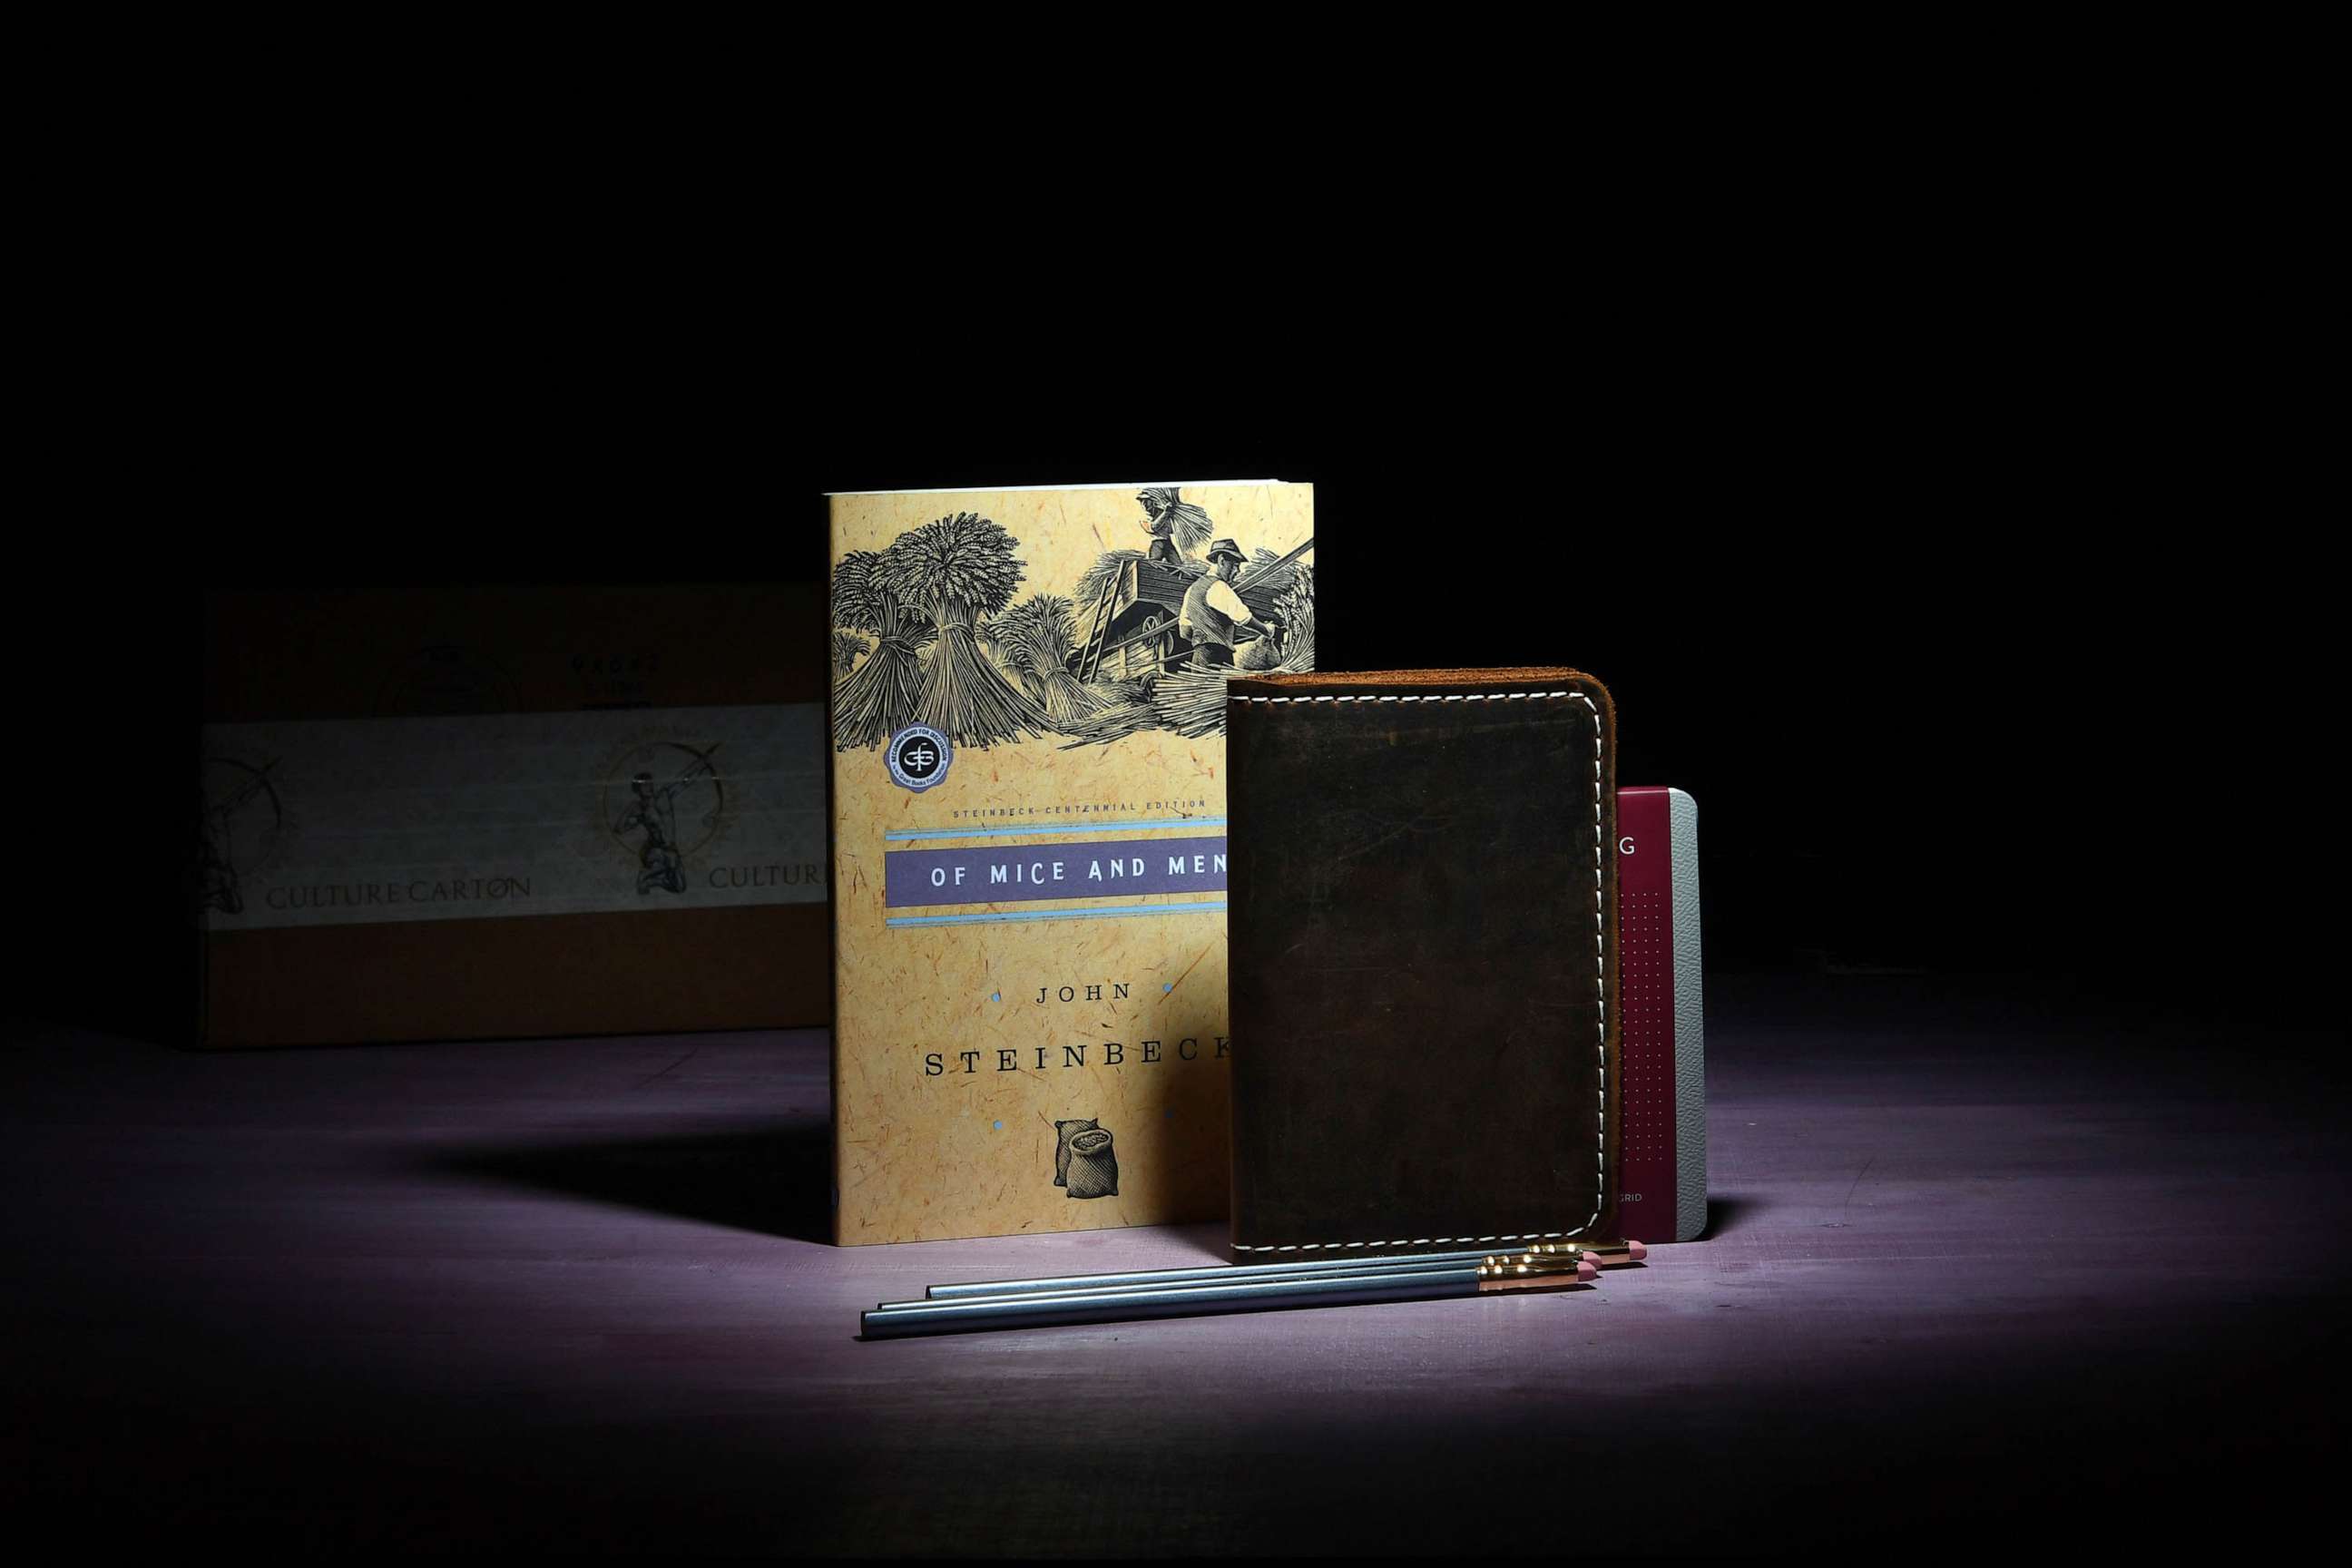 PHOTO: FILE - The Culture Carton boxed book subscription includes John Steinbeck's Of Mice and Men as well as pencils and a leather bound notepad May 16, 2018 in Washington, DC.